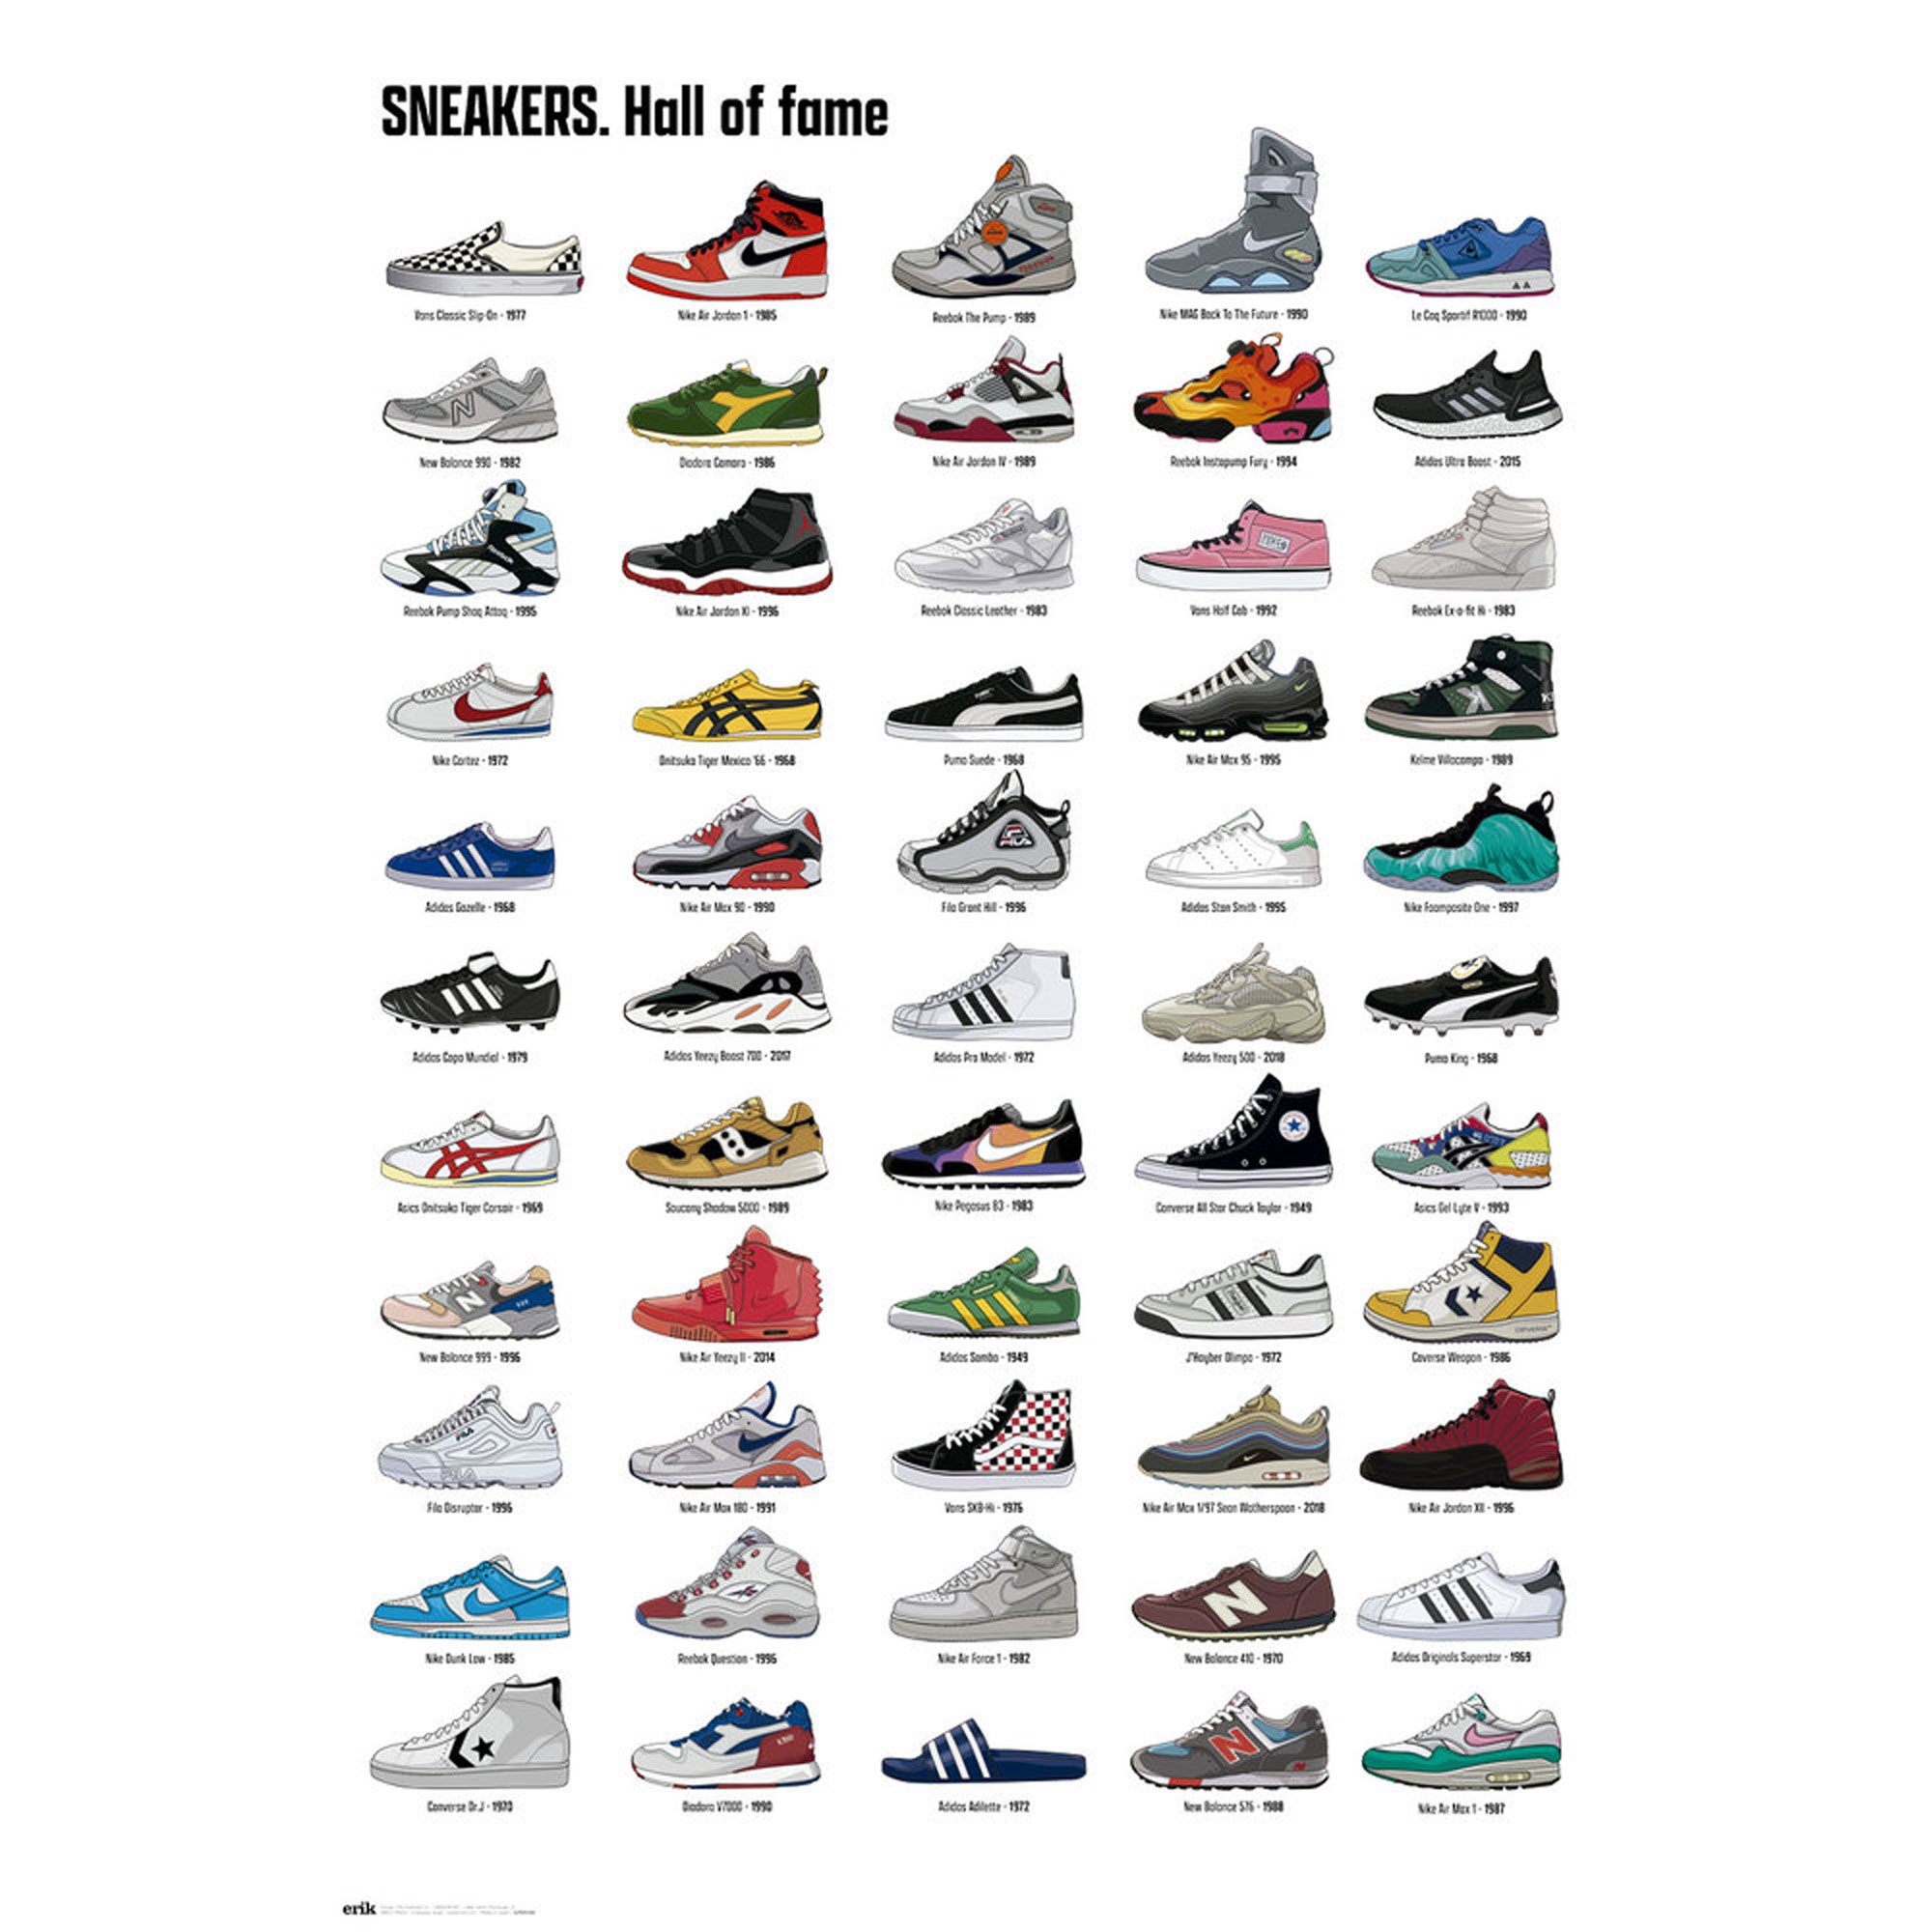 - Hall Sneakers Fame of